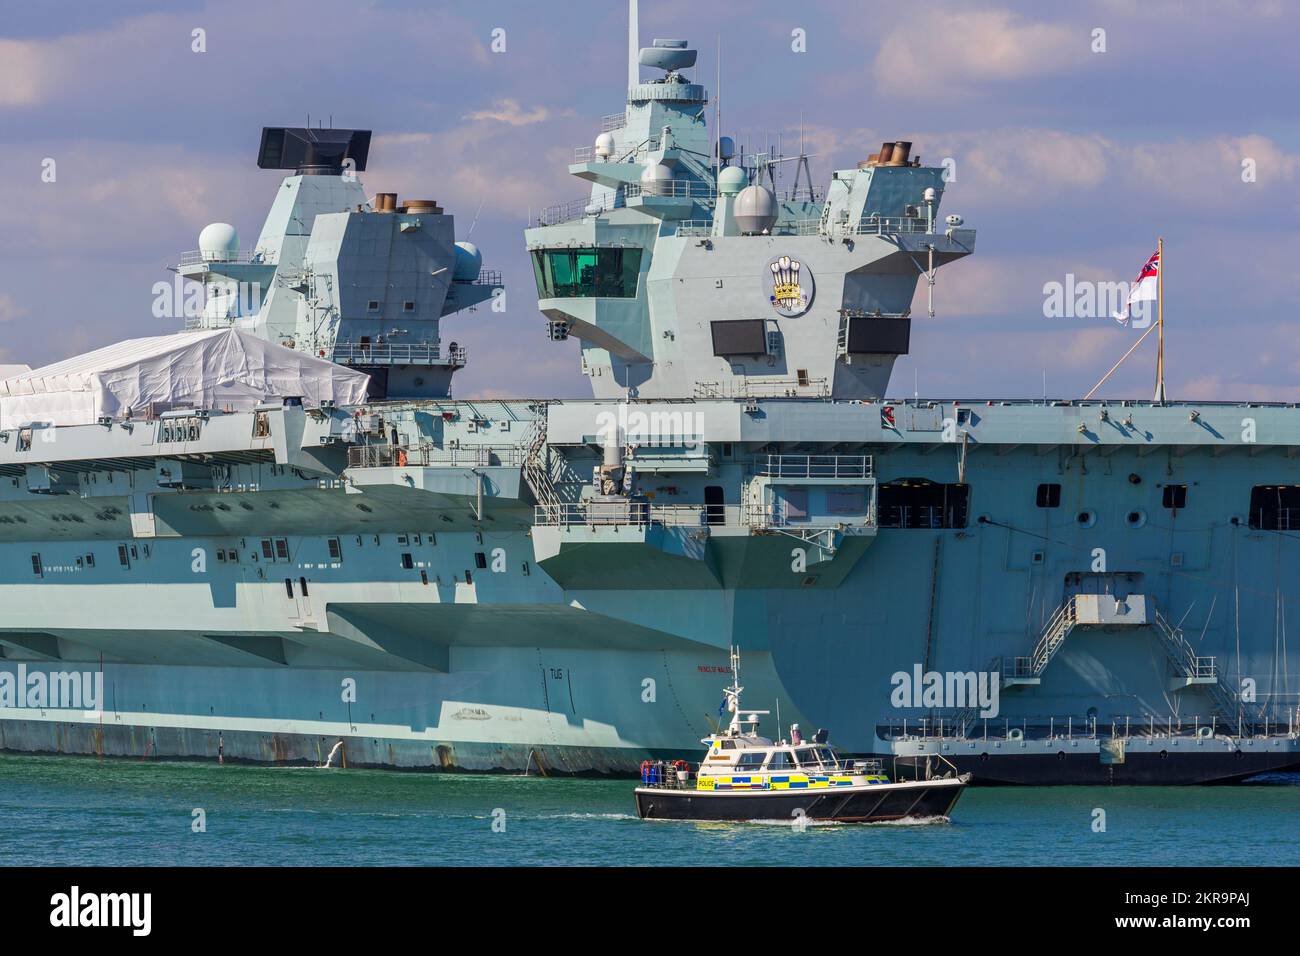 Prince of Wales Aircraft Carrier, Royal Navy Base, Portsmouth, Hampshire, England, Vereinigtes Königreich Stockfoto